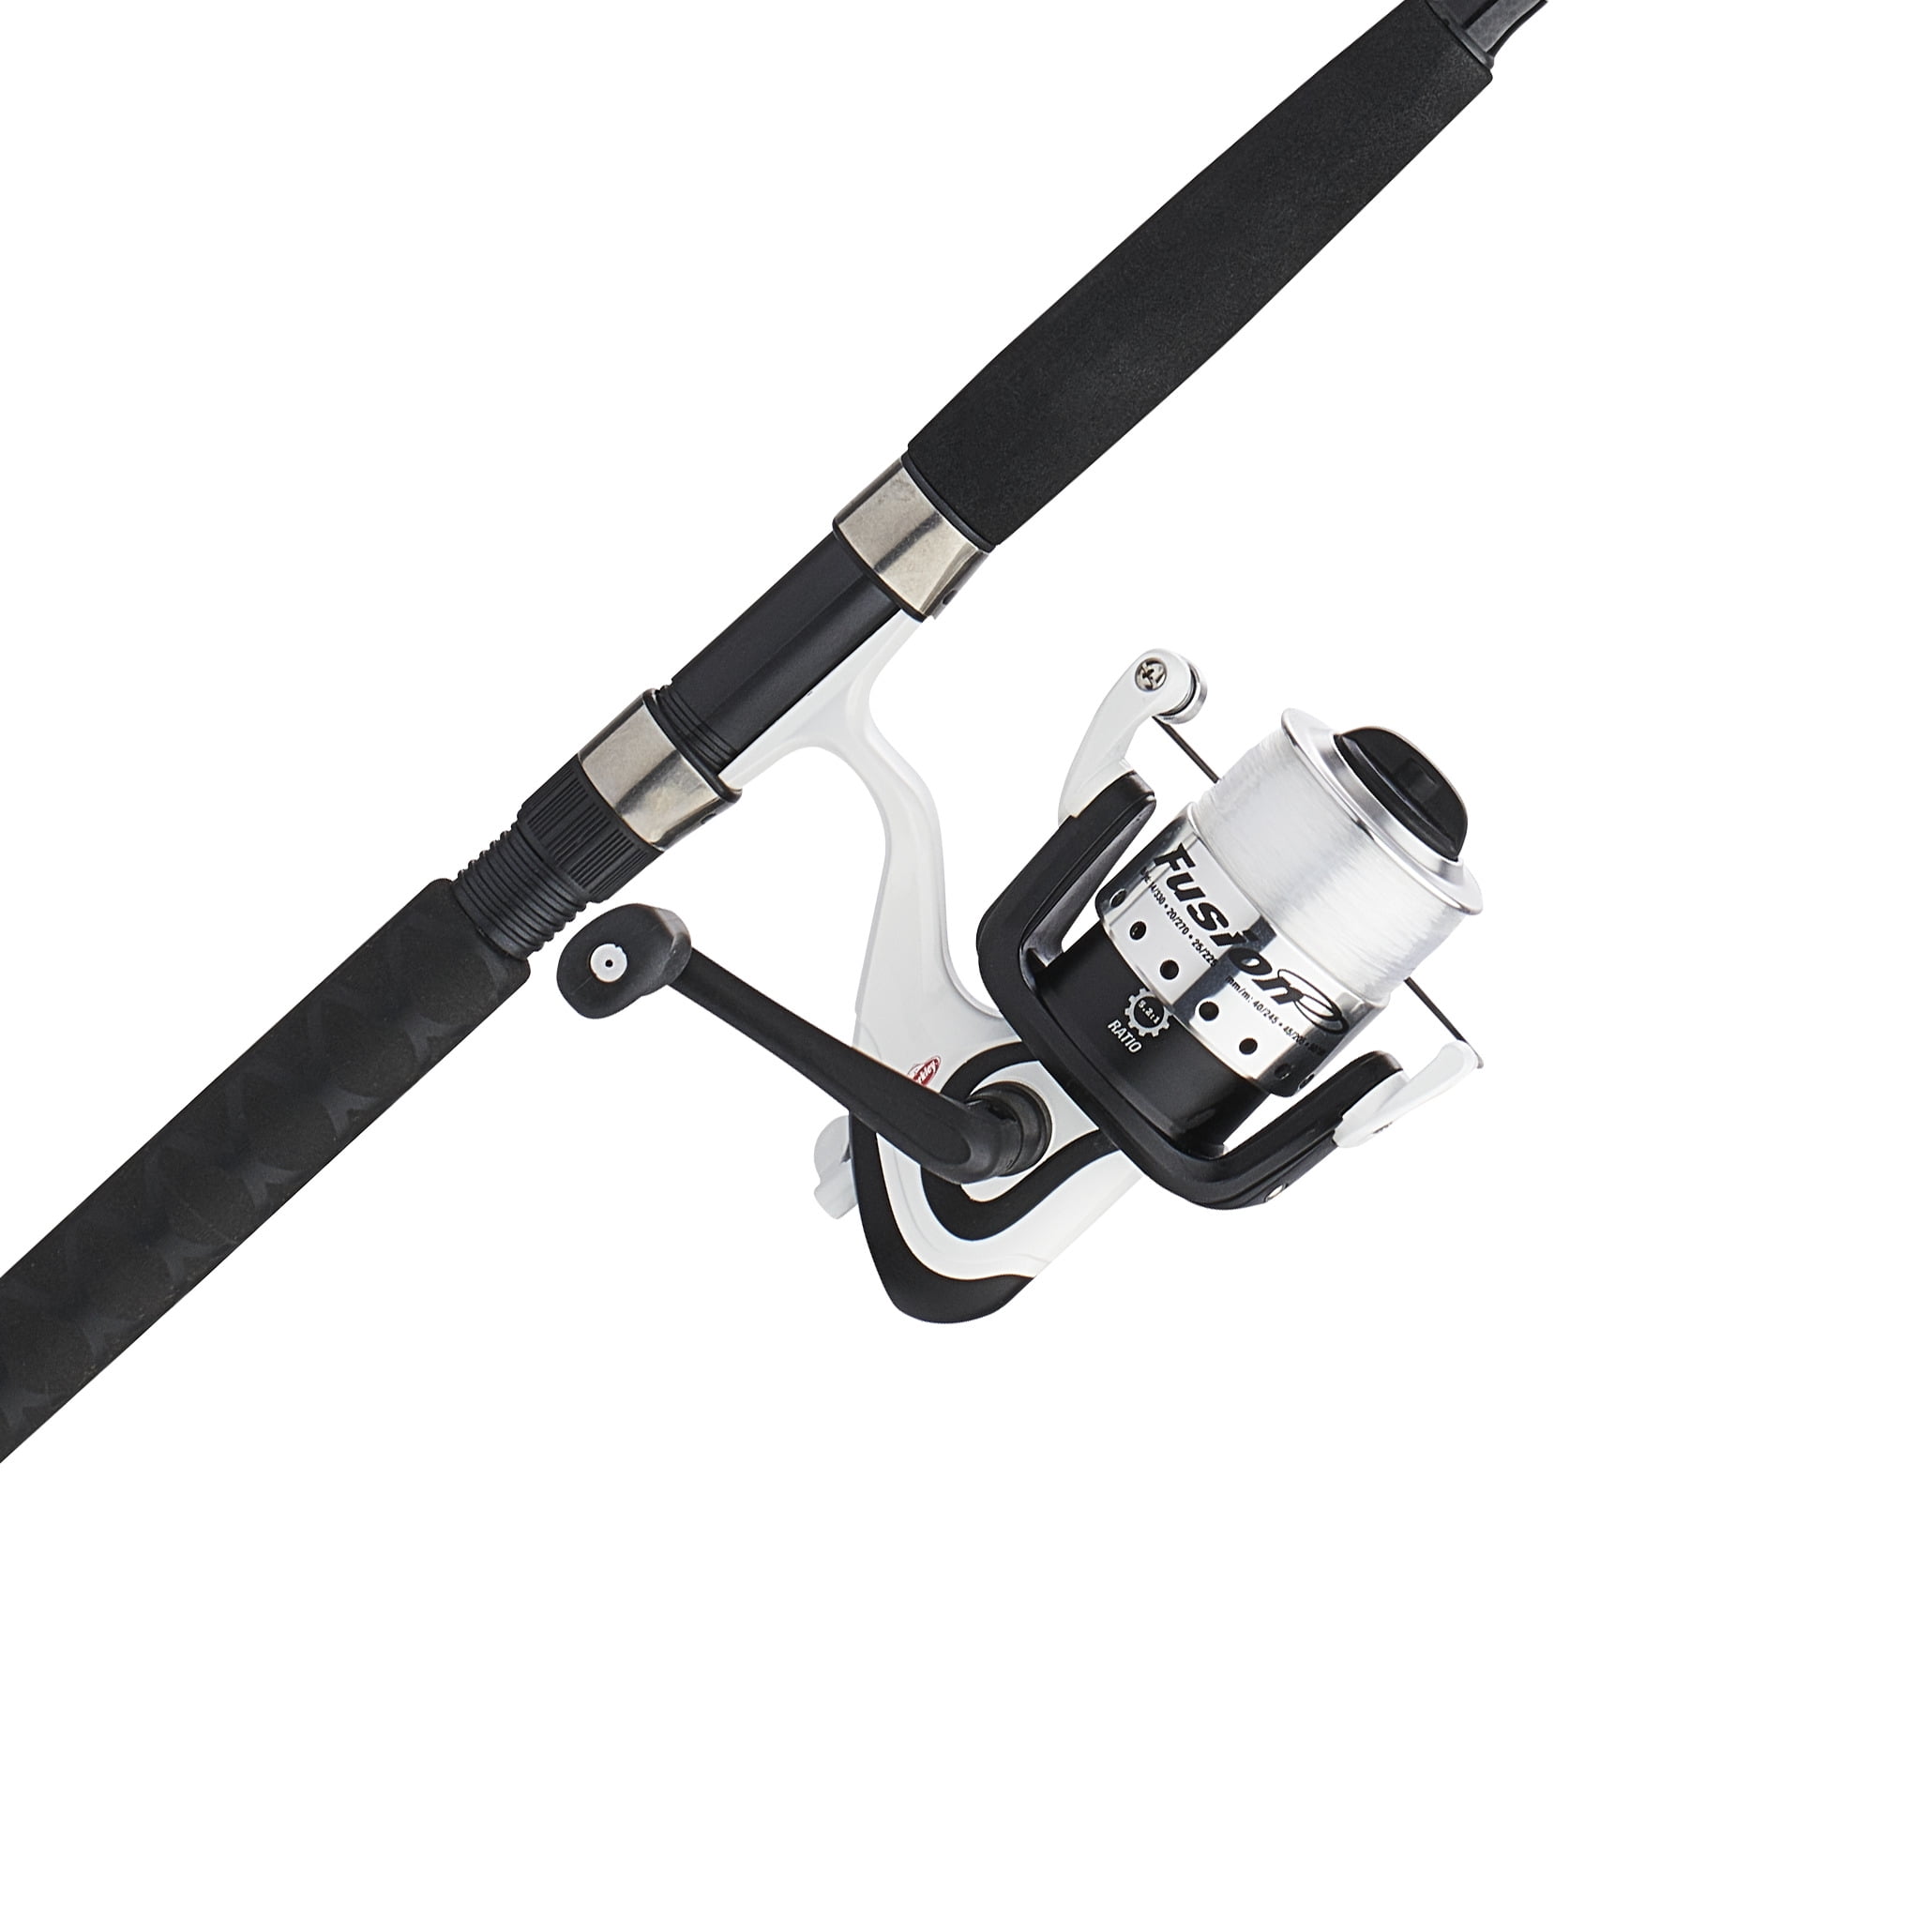 Buy Berkley 7'0” Fusion Fishing Rod and Reel Spinning Combo Online 